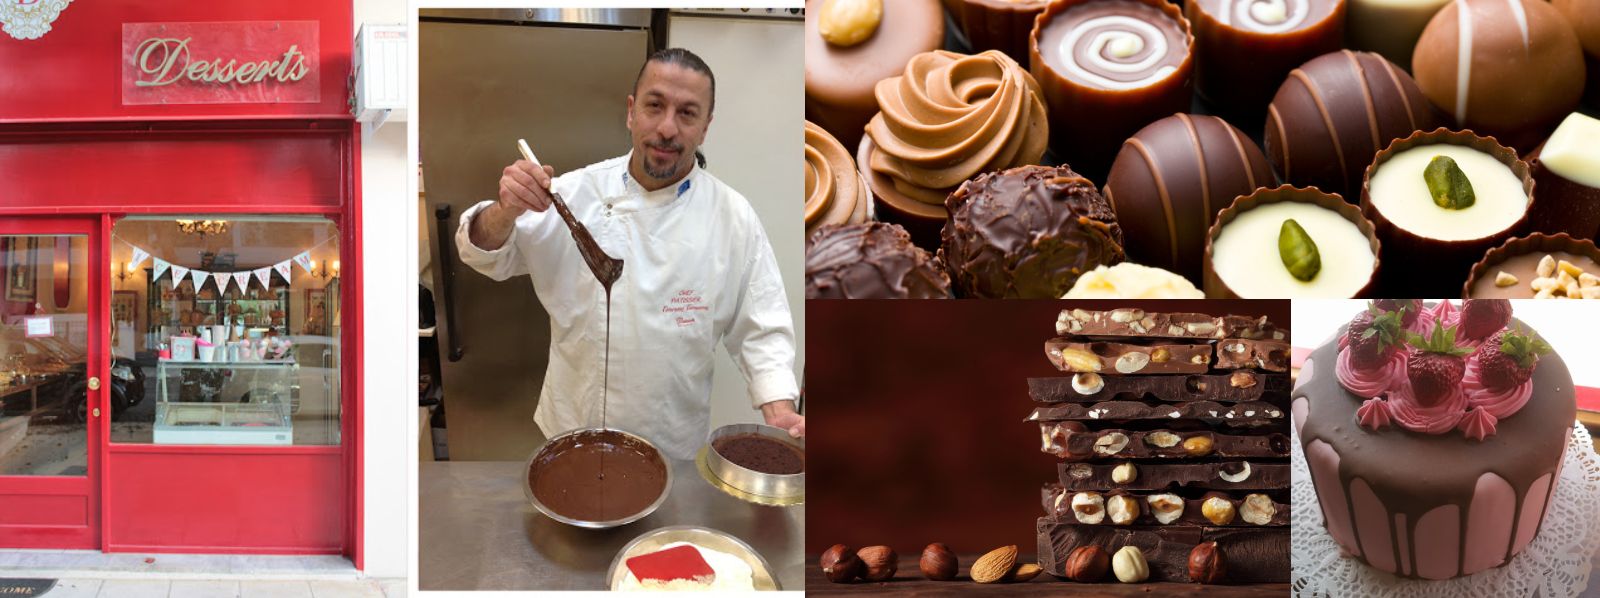 images easyblog articles 6979 griogoris gasteratos pastry chef 209124aa